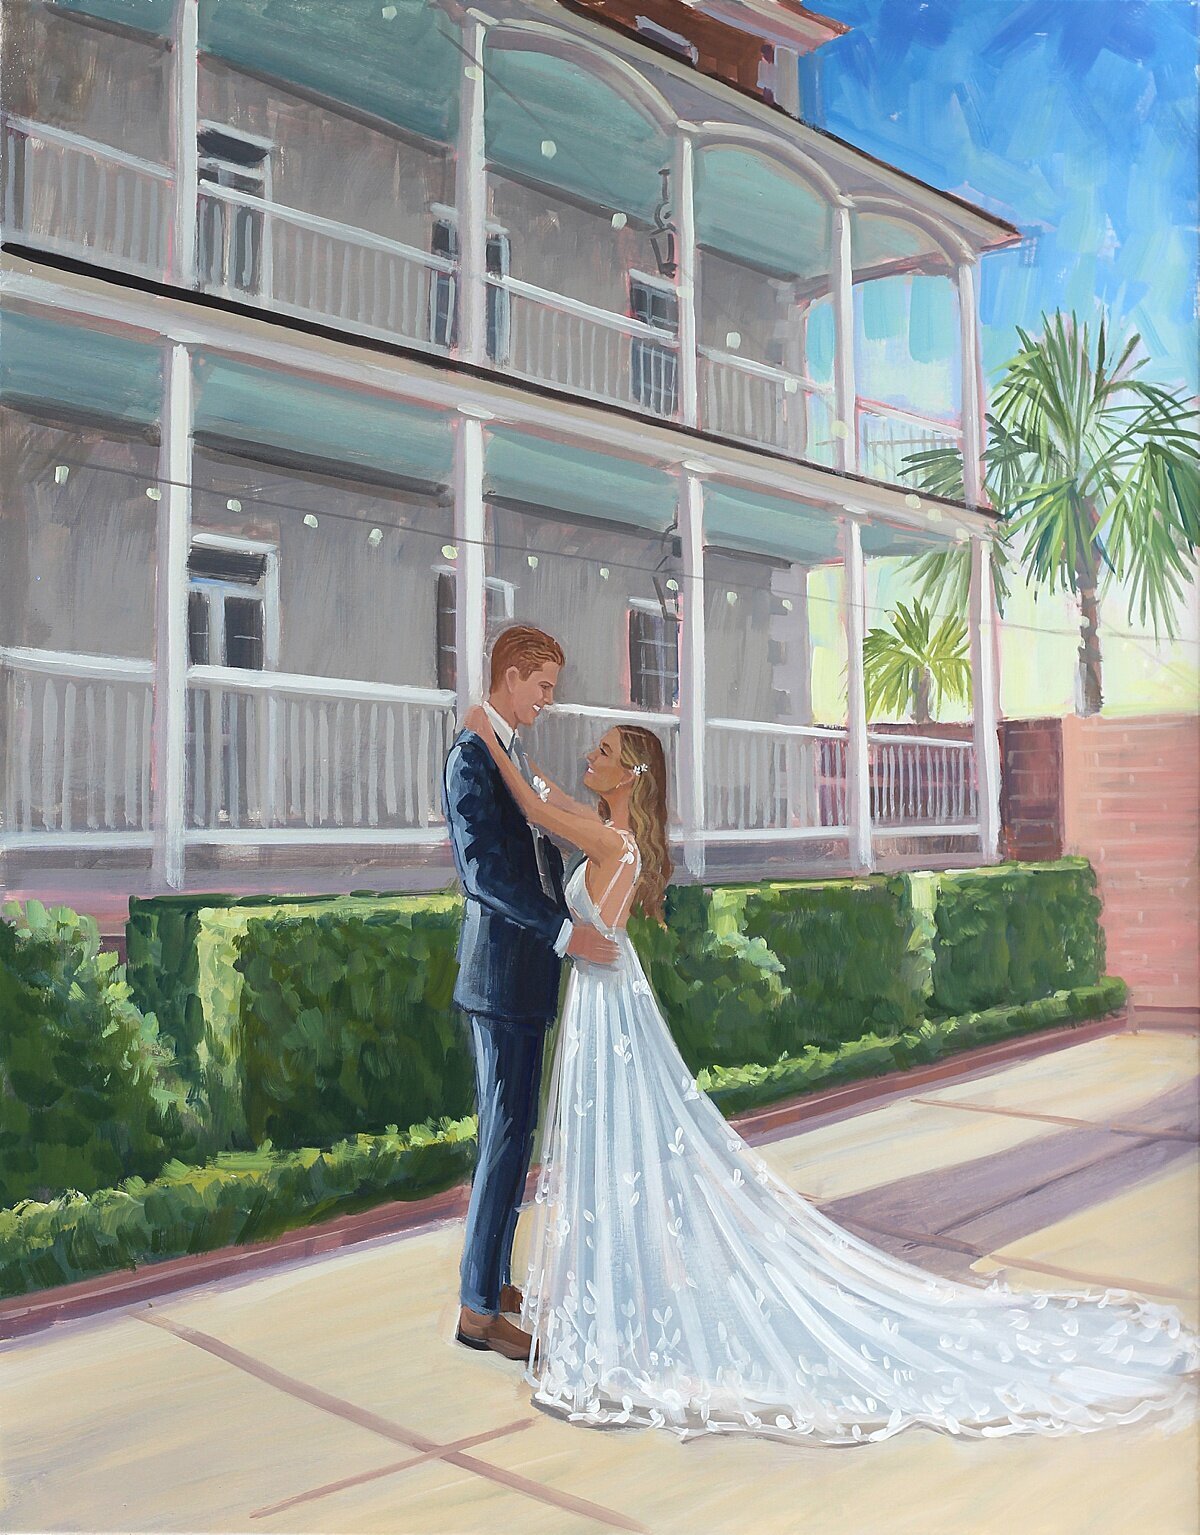 Charleston Live Wedding Painter captures bride and groom's first look at The Gadsden House.  The historic Charleston venue is in the backdrop with a beautiful palm tree and sunset.